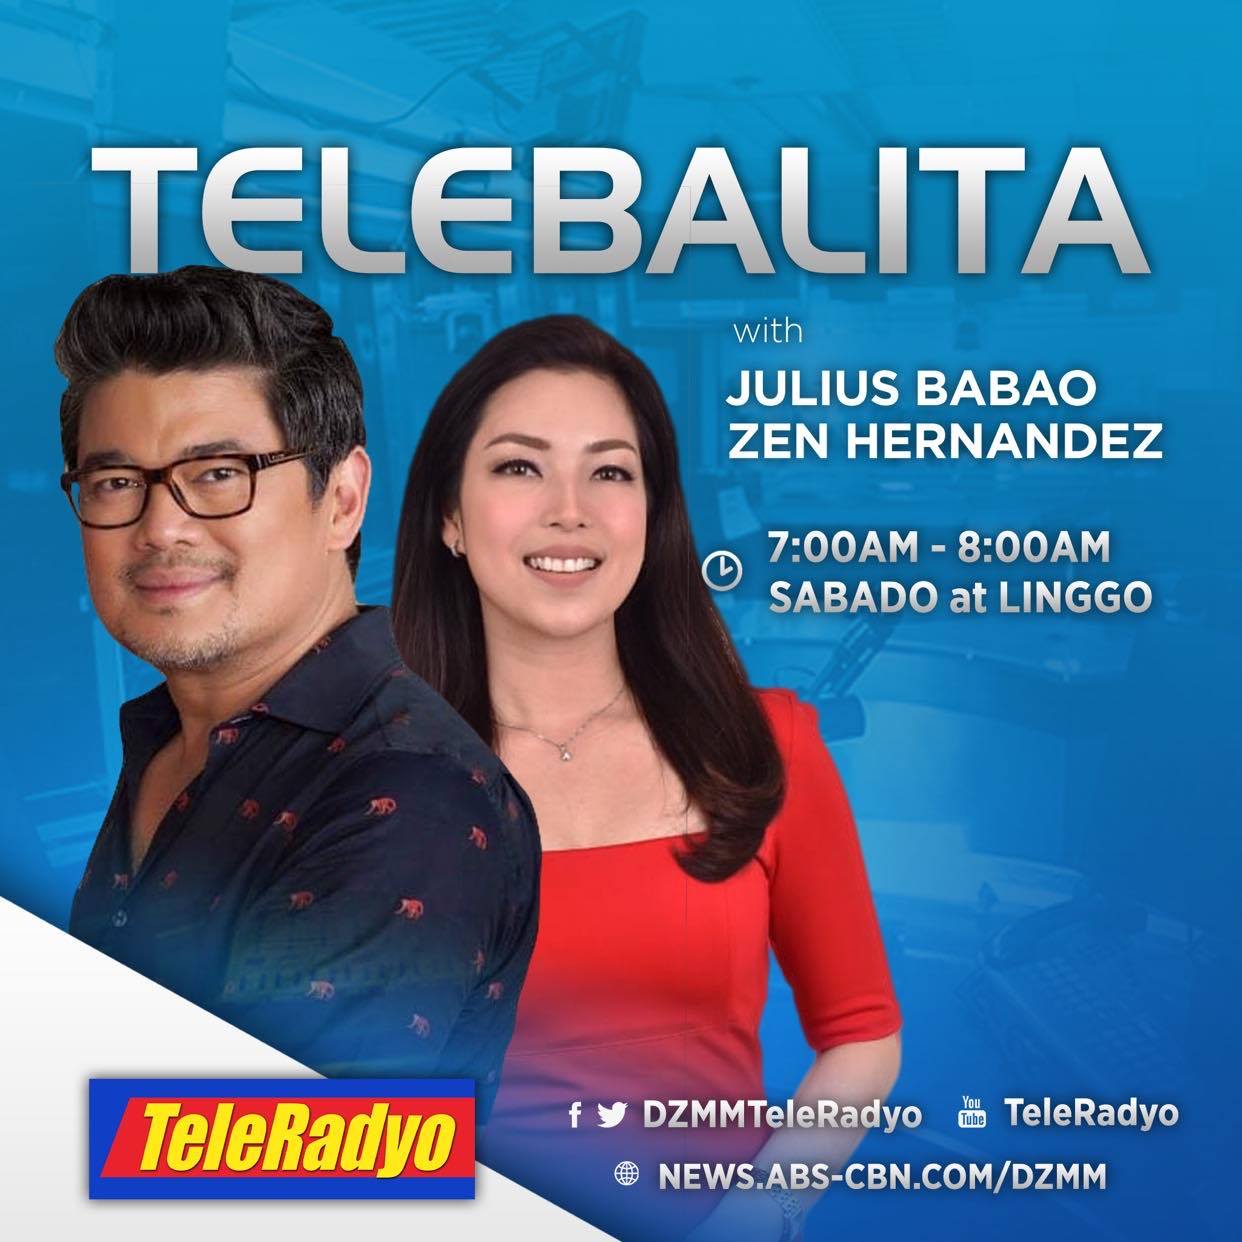 TeleRadyo shakes up weekend lineup with 3 new shows 1